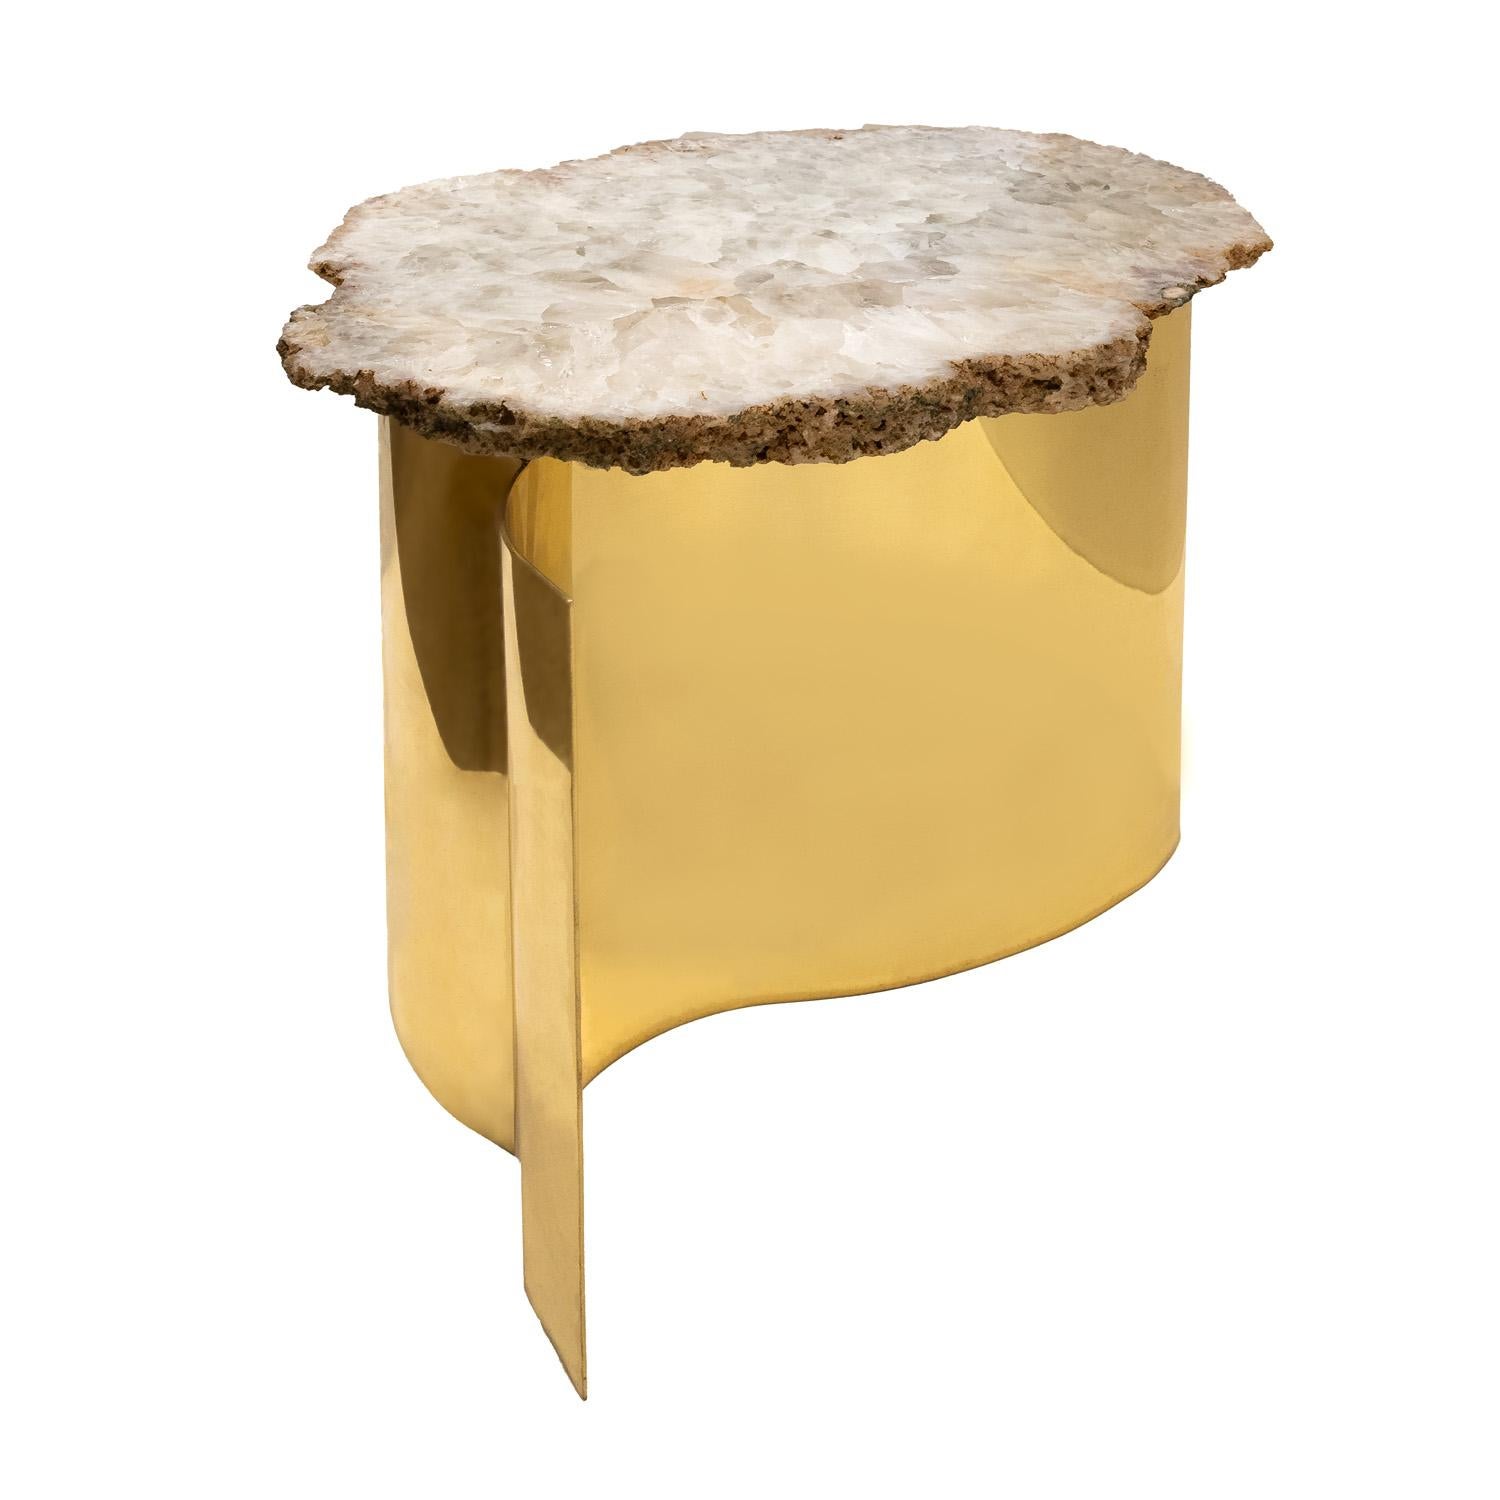 Sculpted side table in polished brass with polished onyx top with natural edge, custom design, American 1970's. This artisan side table is beautifully made and incredibly chic.